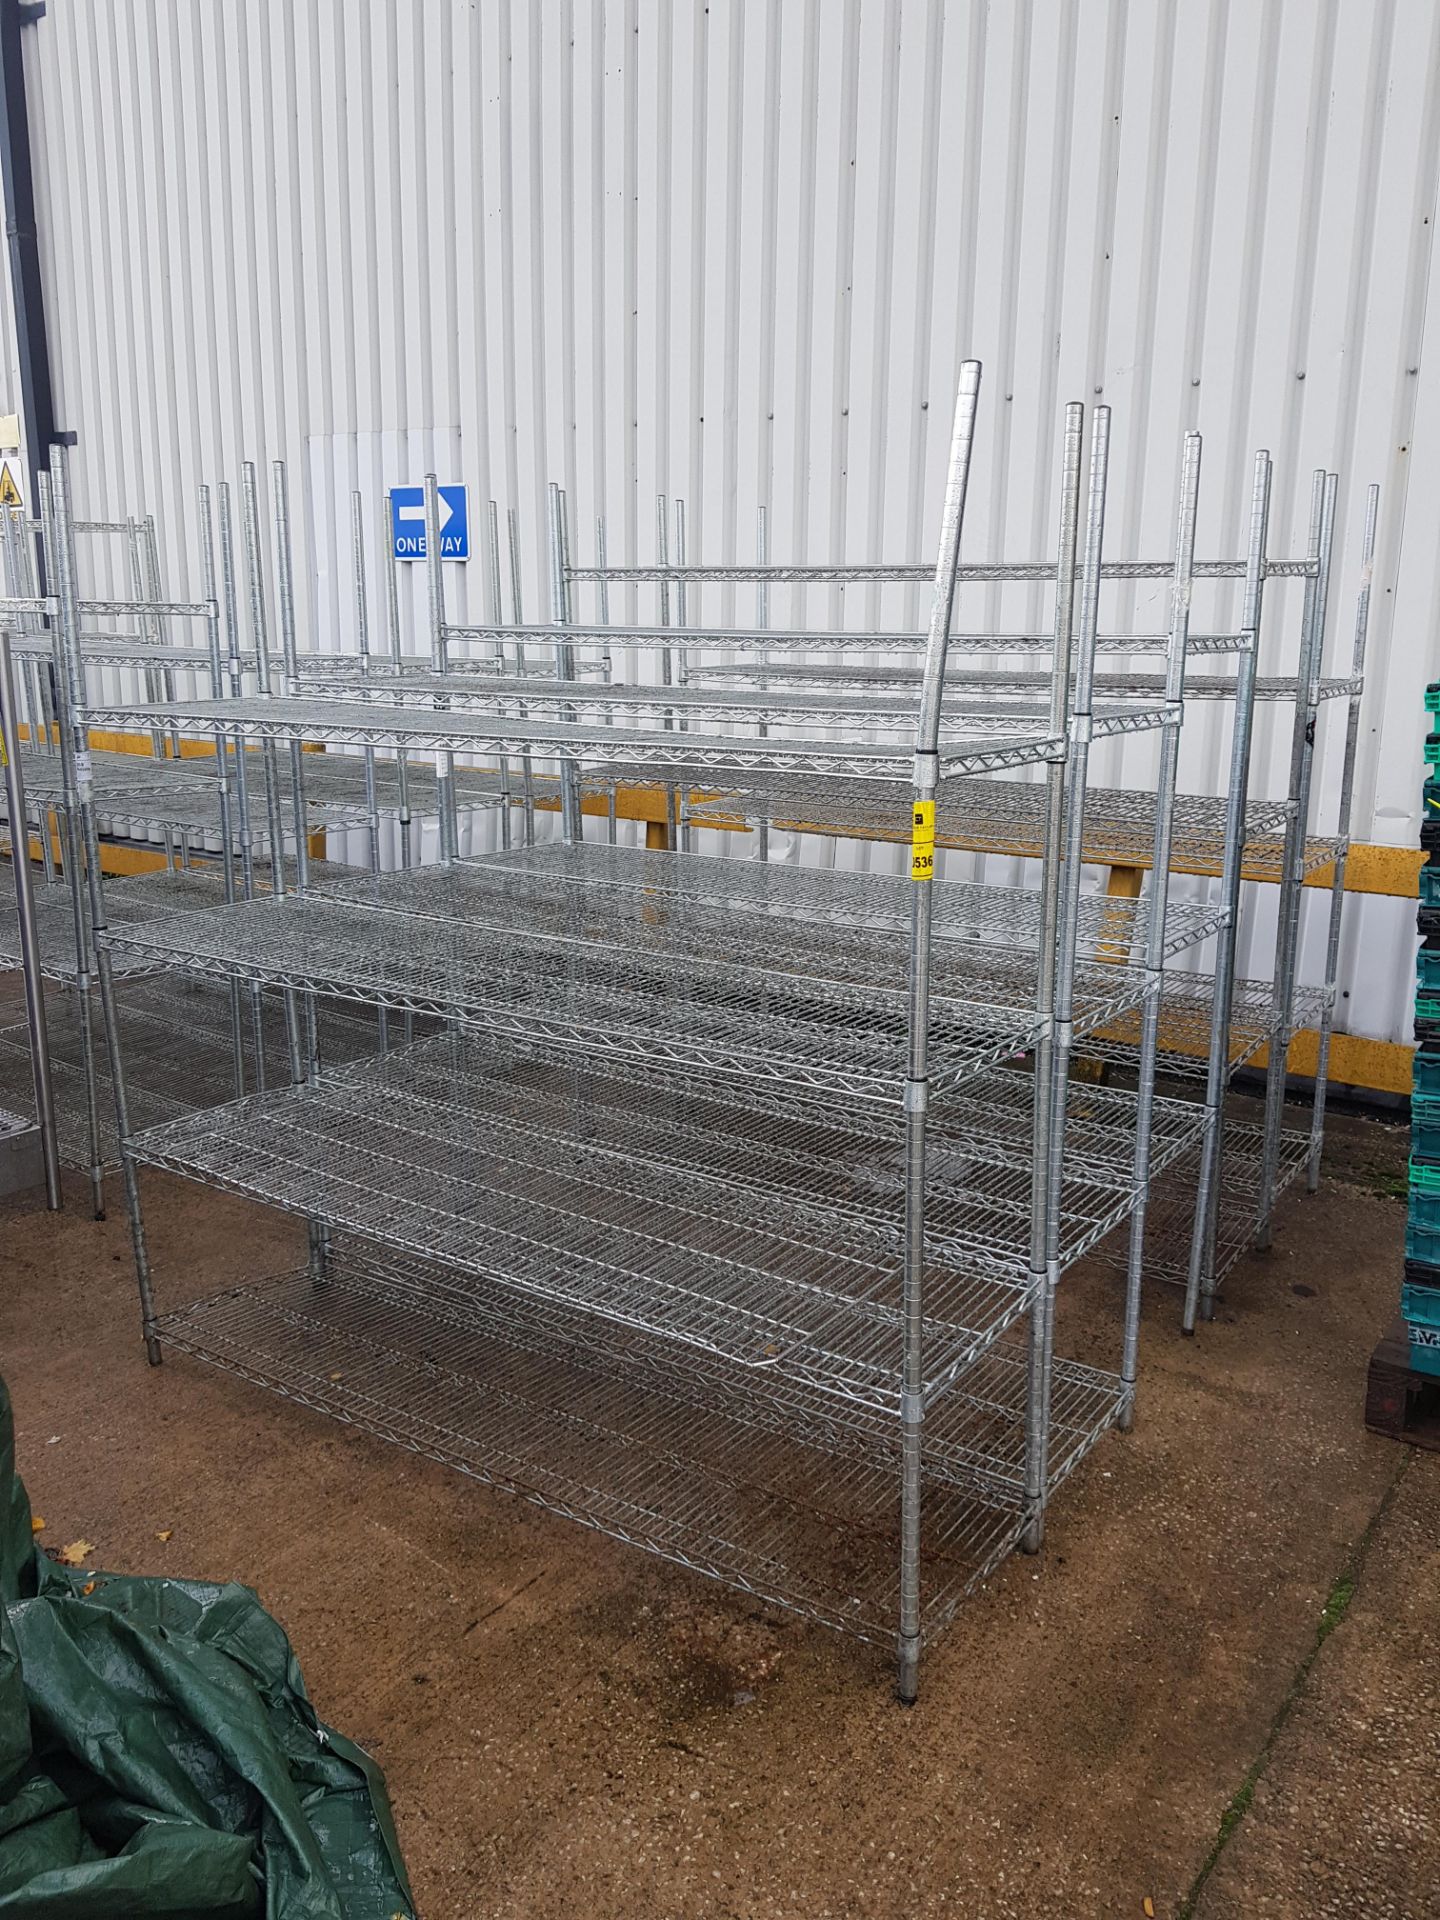 5 X VOGUE SHELVING RACKS - WITH ADJUSTABLE RACK HEIGHT - SOME 3 TIER SOME 4 TIER ( 180 CM LENGTH /